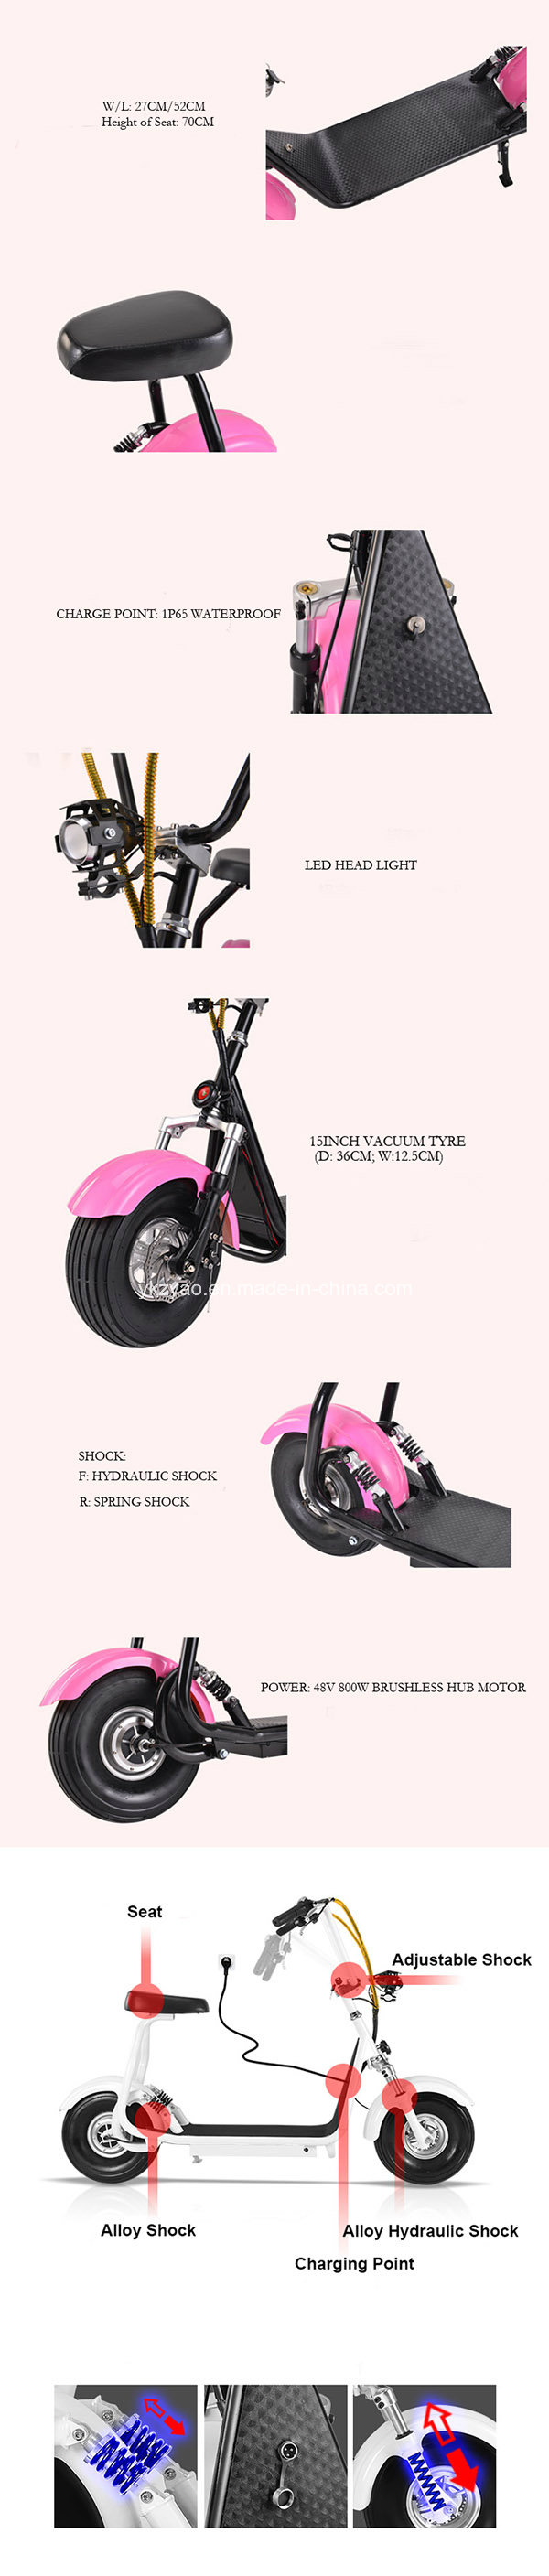 2016 Popular Harley Style Electric Scooter with Big Wheels, Fashion City Scooter Citycoco